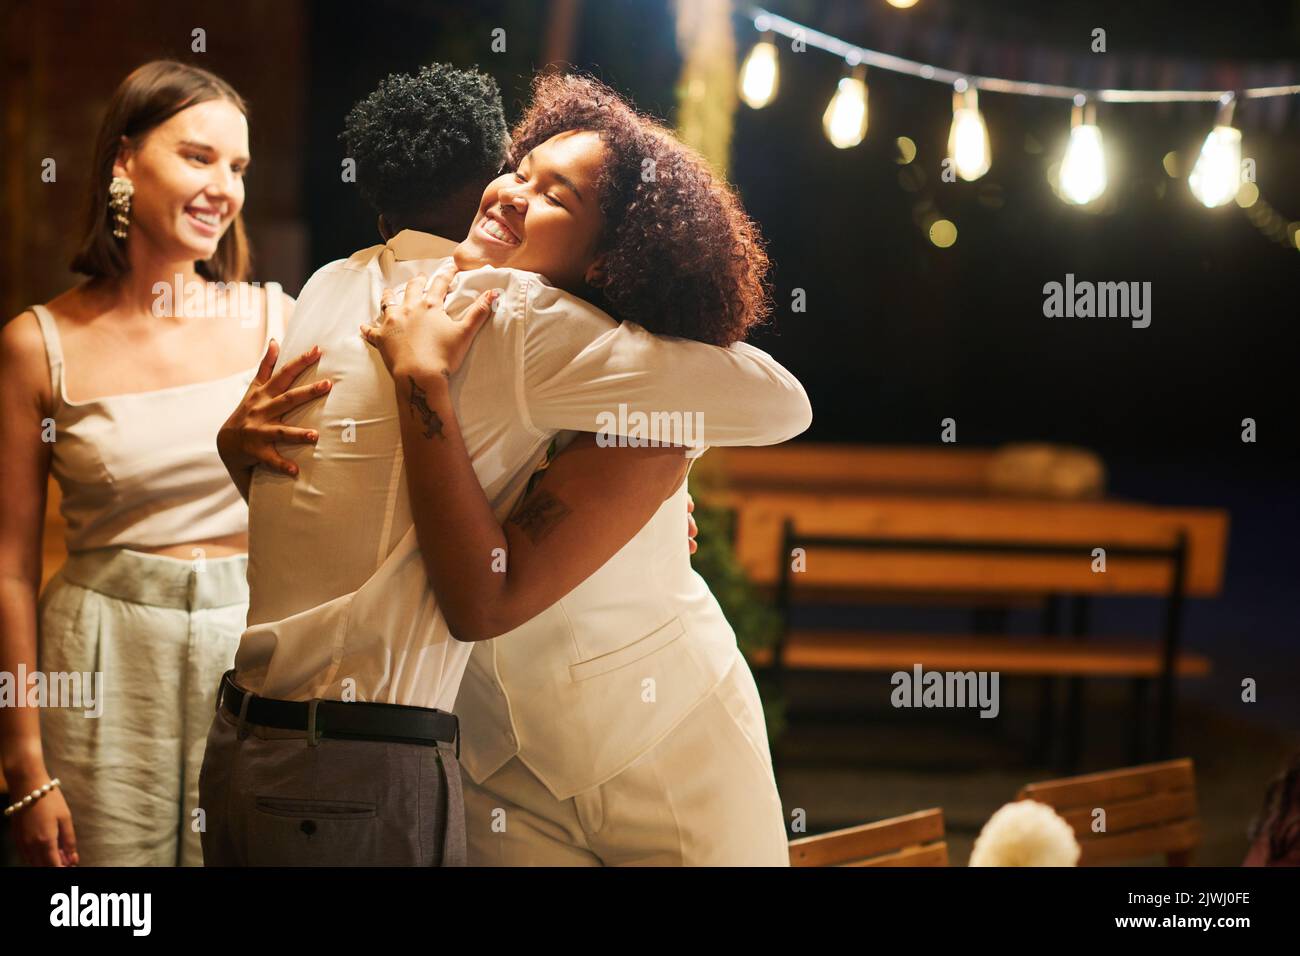 Young cheerful African American bride giving hug to black man in white shirt while meeting guests coming to wedding party and feast Stock Photo